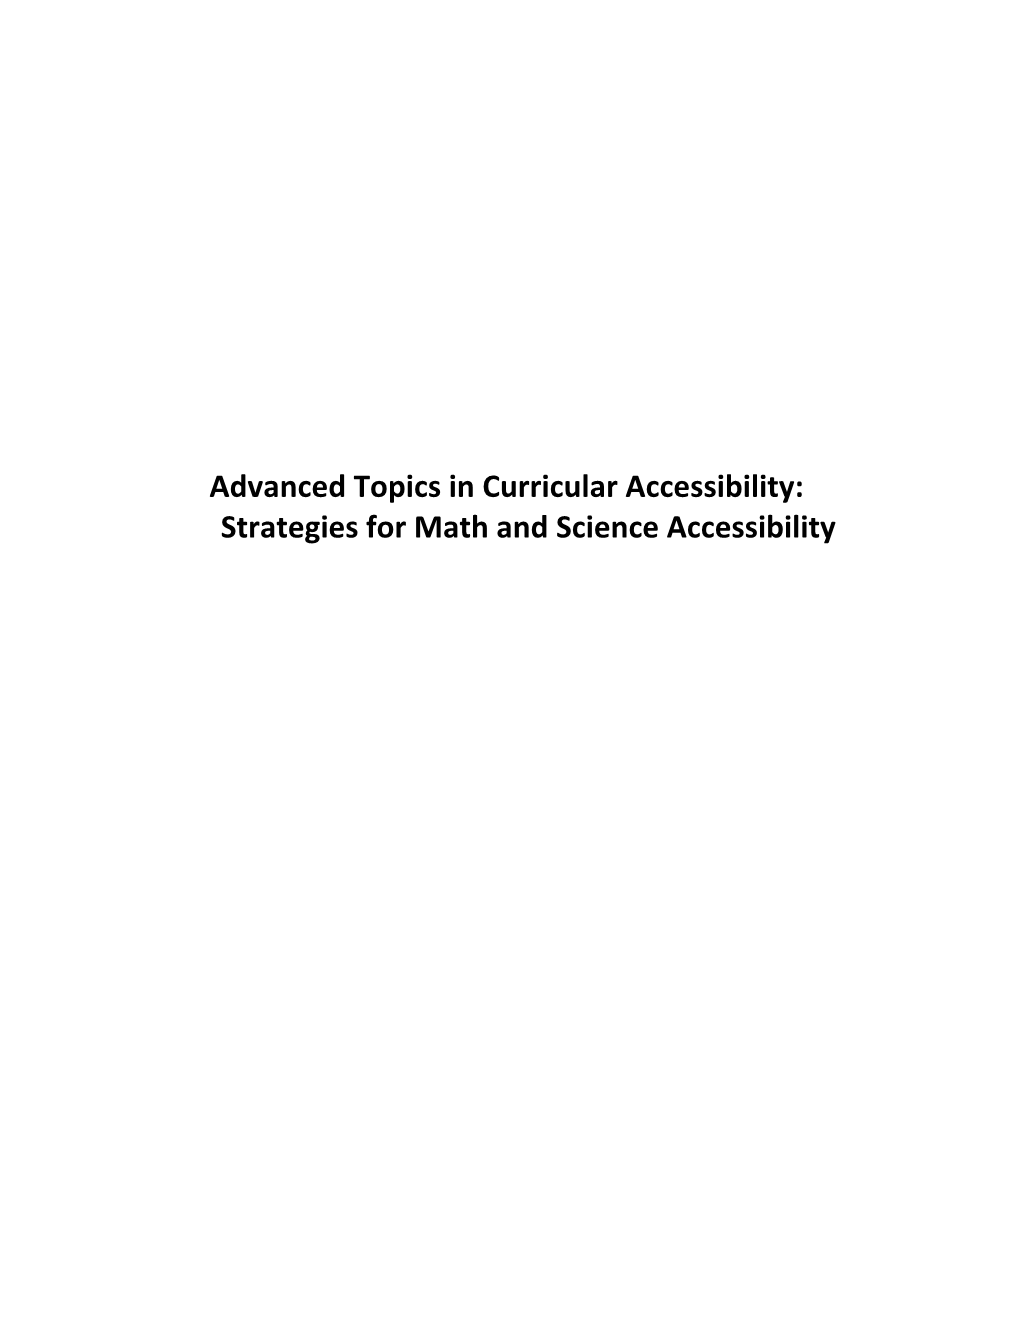 Advanced Topics in Curricular Accessibility: Strategies for Math and Science Accessibility